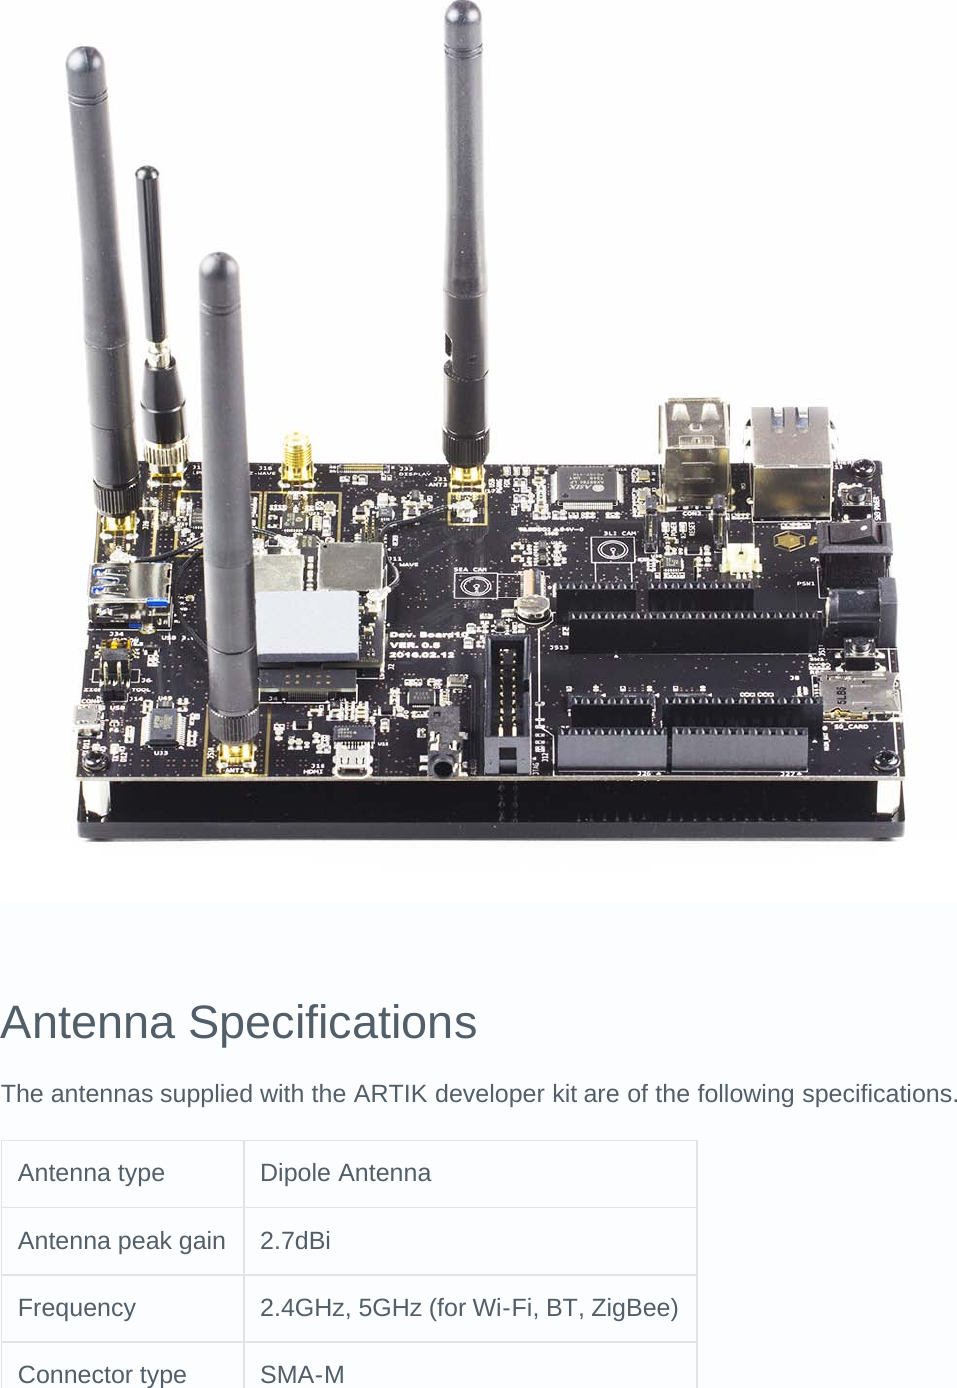 Antenna SpecificationsThe antennas supplied with the ARTIK developer kit are of the following specifications.Antenna type Dipole AntennaAntenna peak gain 2.7dBiFrequency 2.4GHz, 5GHz (for Wi-Fi, BT, ZigBee)Connector type SMA-M